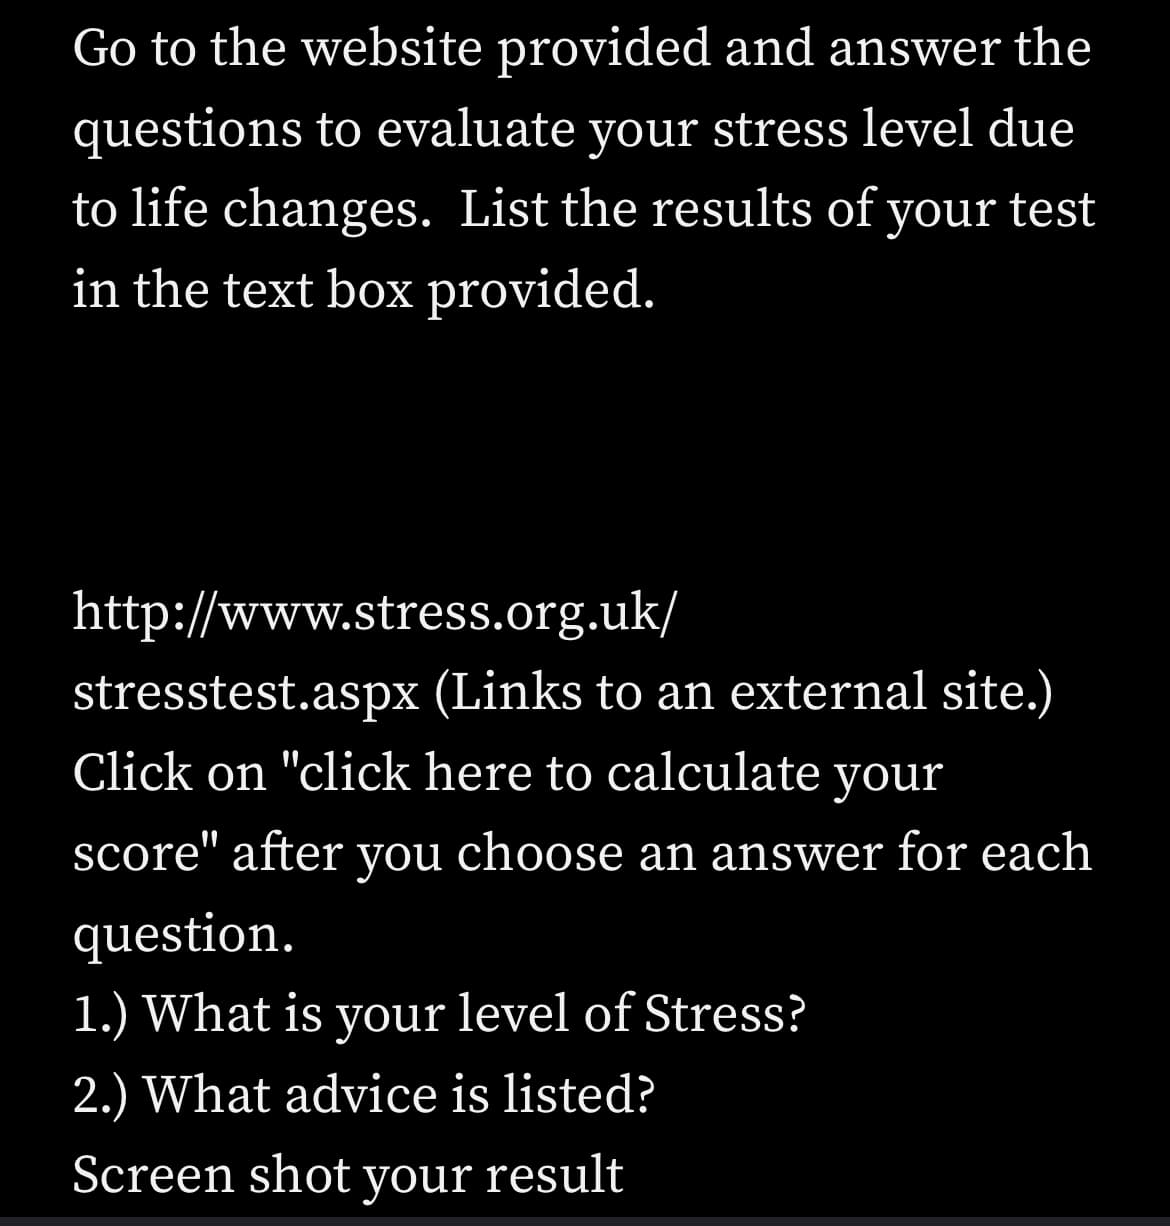 Go to the website provided and answer the
questions to evaluate your stress level due
to life changes. List the results of your test
in the text box provided.
http://www.stress.org.uk/
stresstest.aspx (Links to an external site.)
Click on "click here to calculate your
score" after you choose an answer for each
question.
1.) What is your level of Stress?
2.) What advice is listed?
Screen shot your result